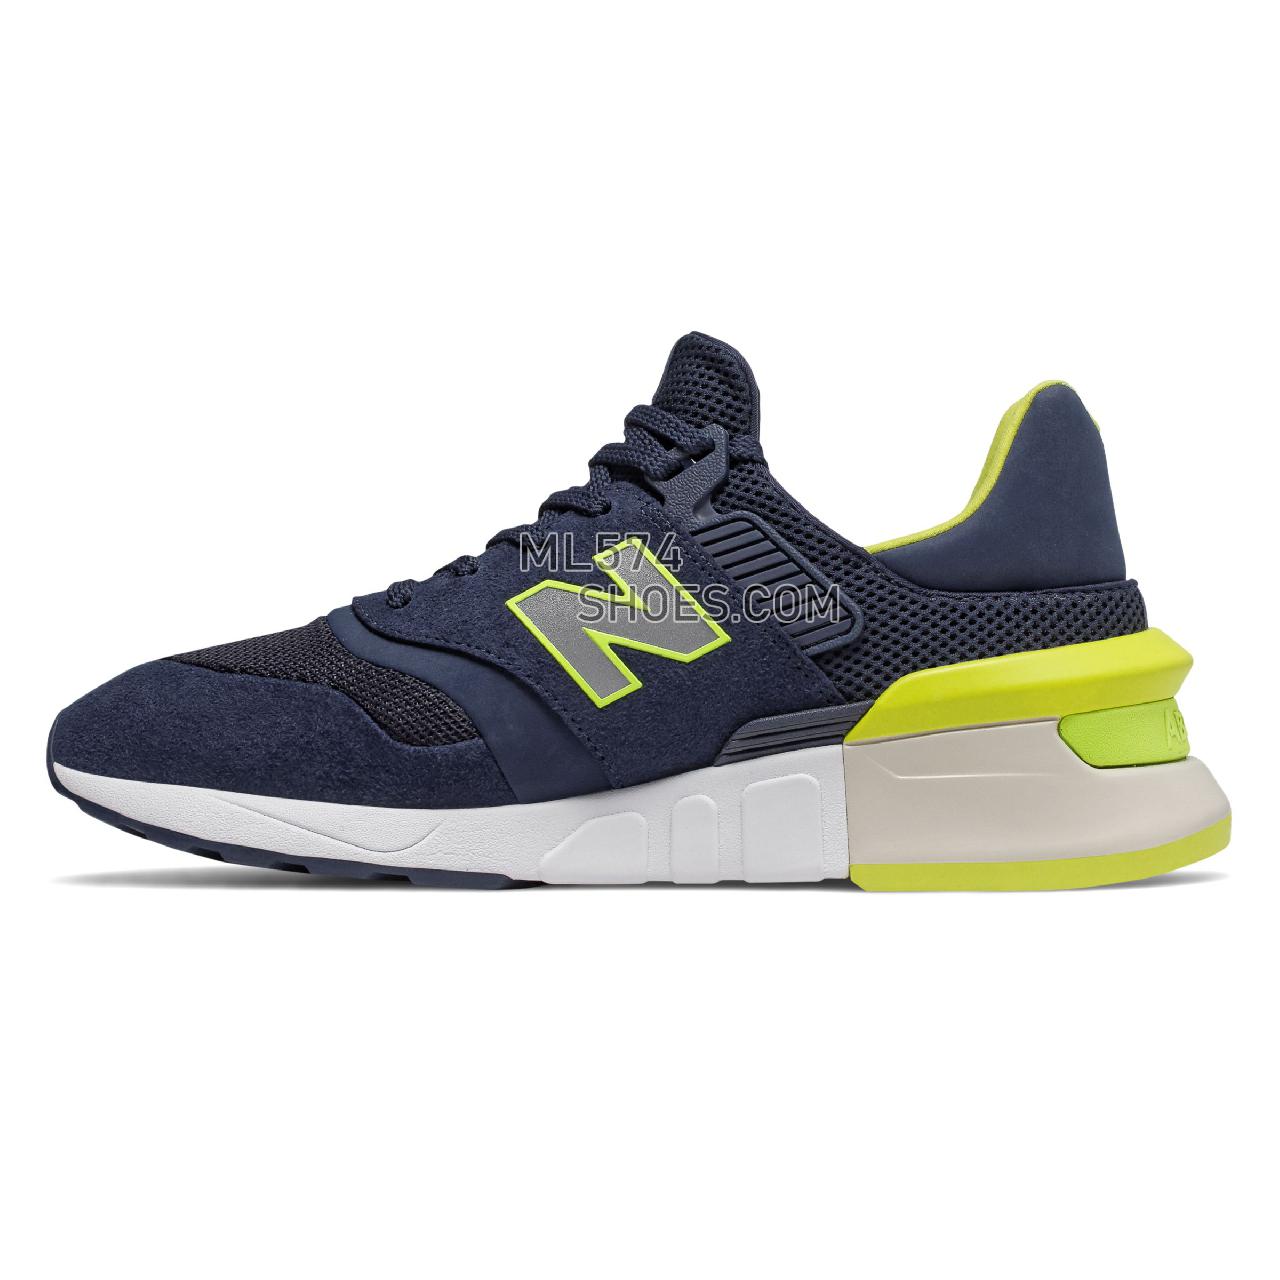 New Balance 997 Sport - Men's Sport Style Sneakers - Pigment with Sulphur Yellow - MS997RH